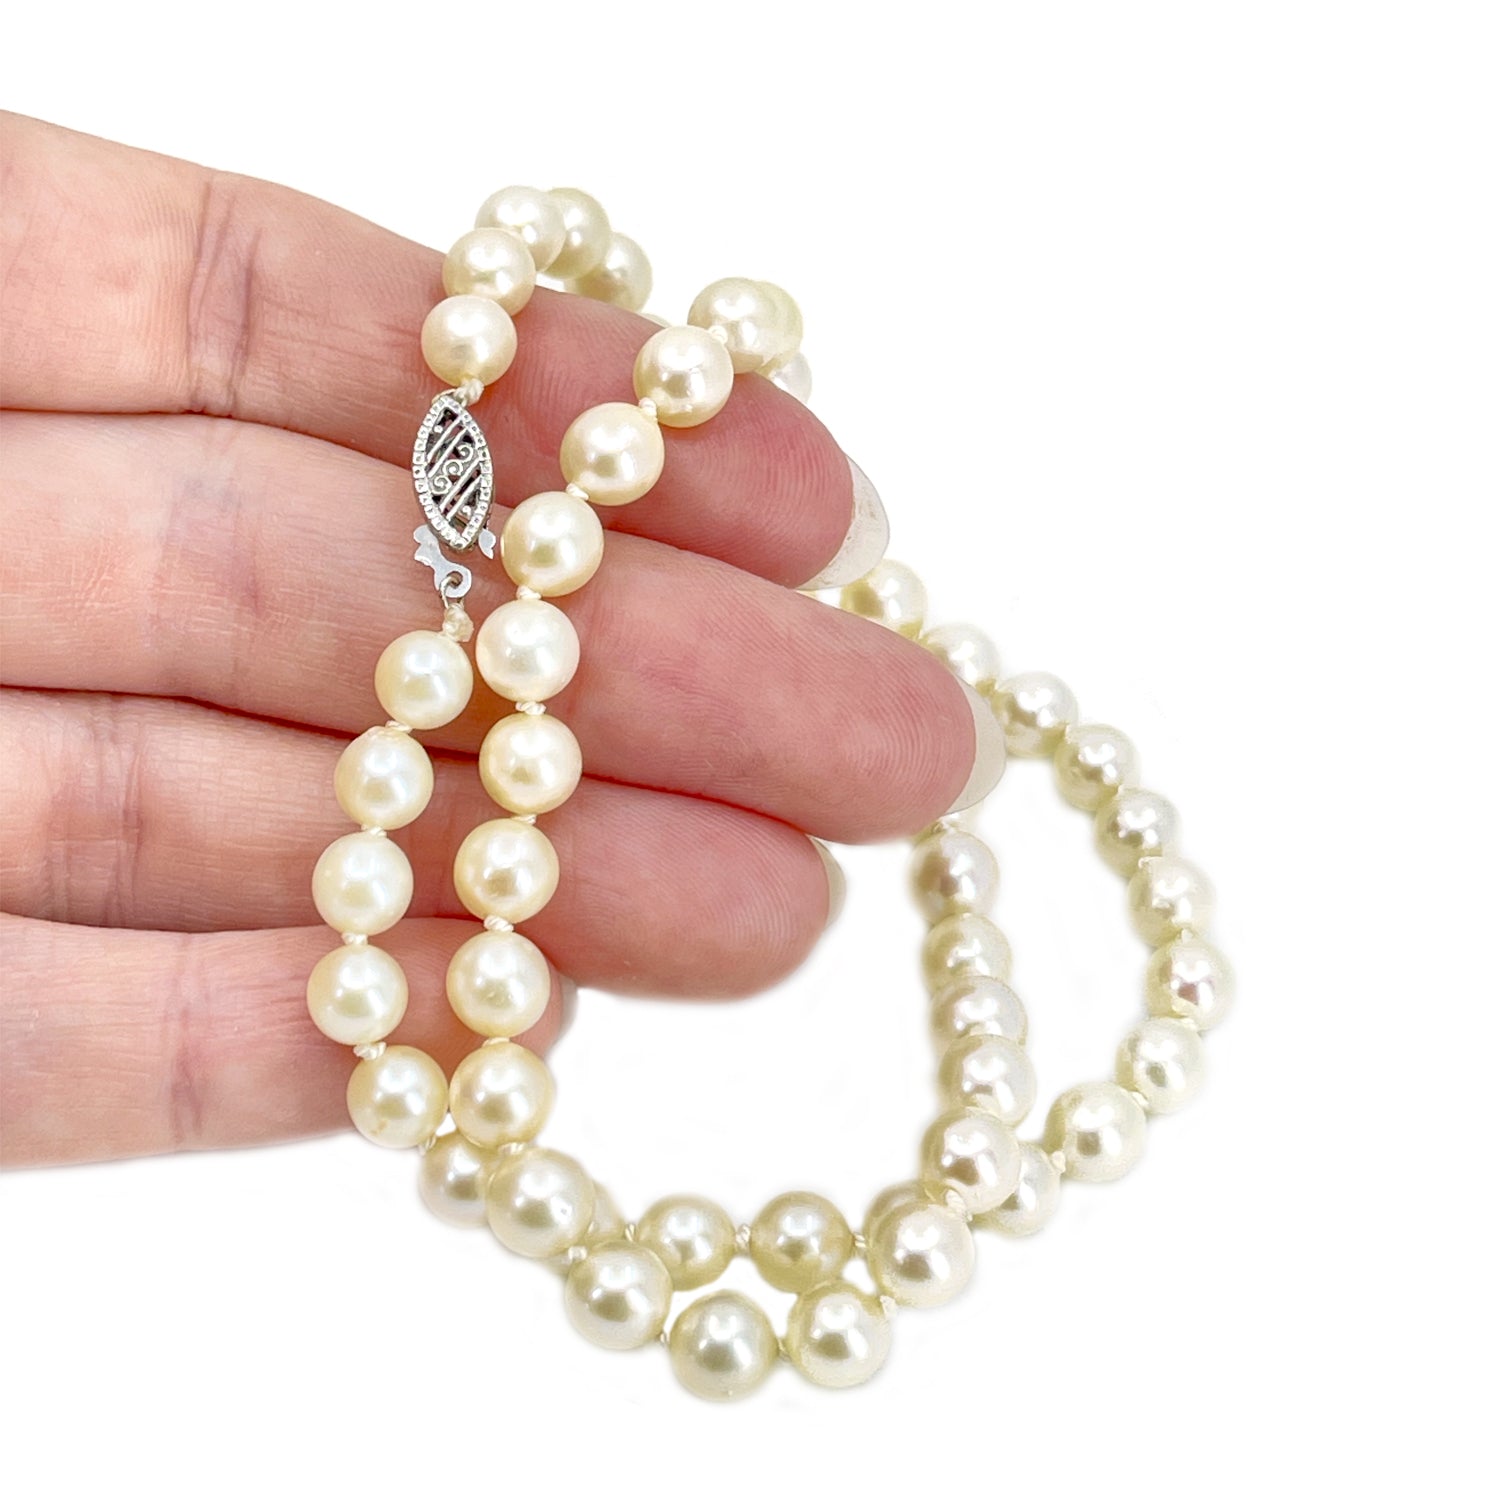 Filigree Choker Vintage Japanese Saltwater Cultured Akoya Pearl Necklace - 10K White Gold 15.50 Inch